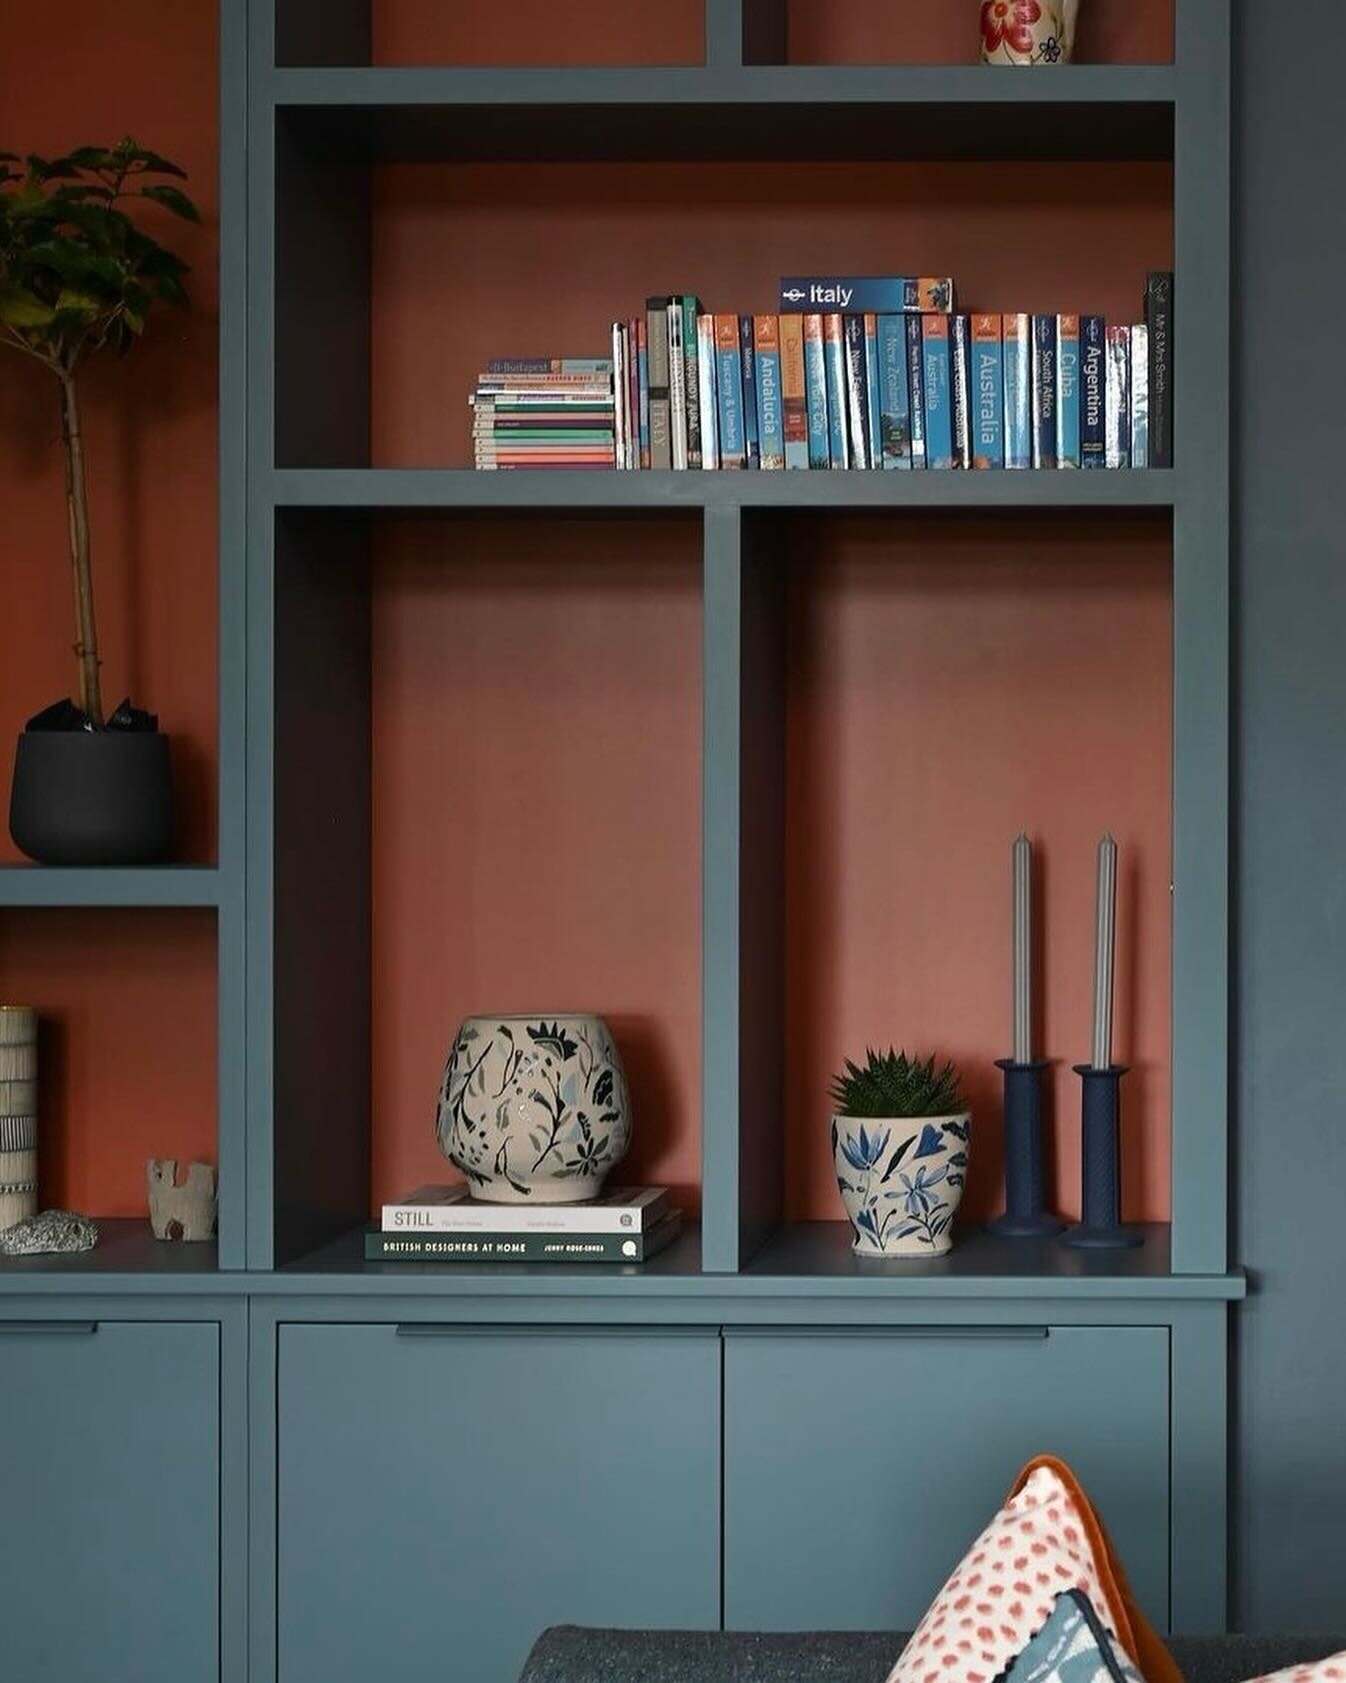 Painting your cabinetry a rich colour can create the perfect backdrop to showcase your favourite books and treasures. 

Here is an example of how to style collections of objects and books to create an interesting display. We chose a warm terracotta f